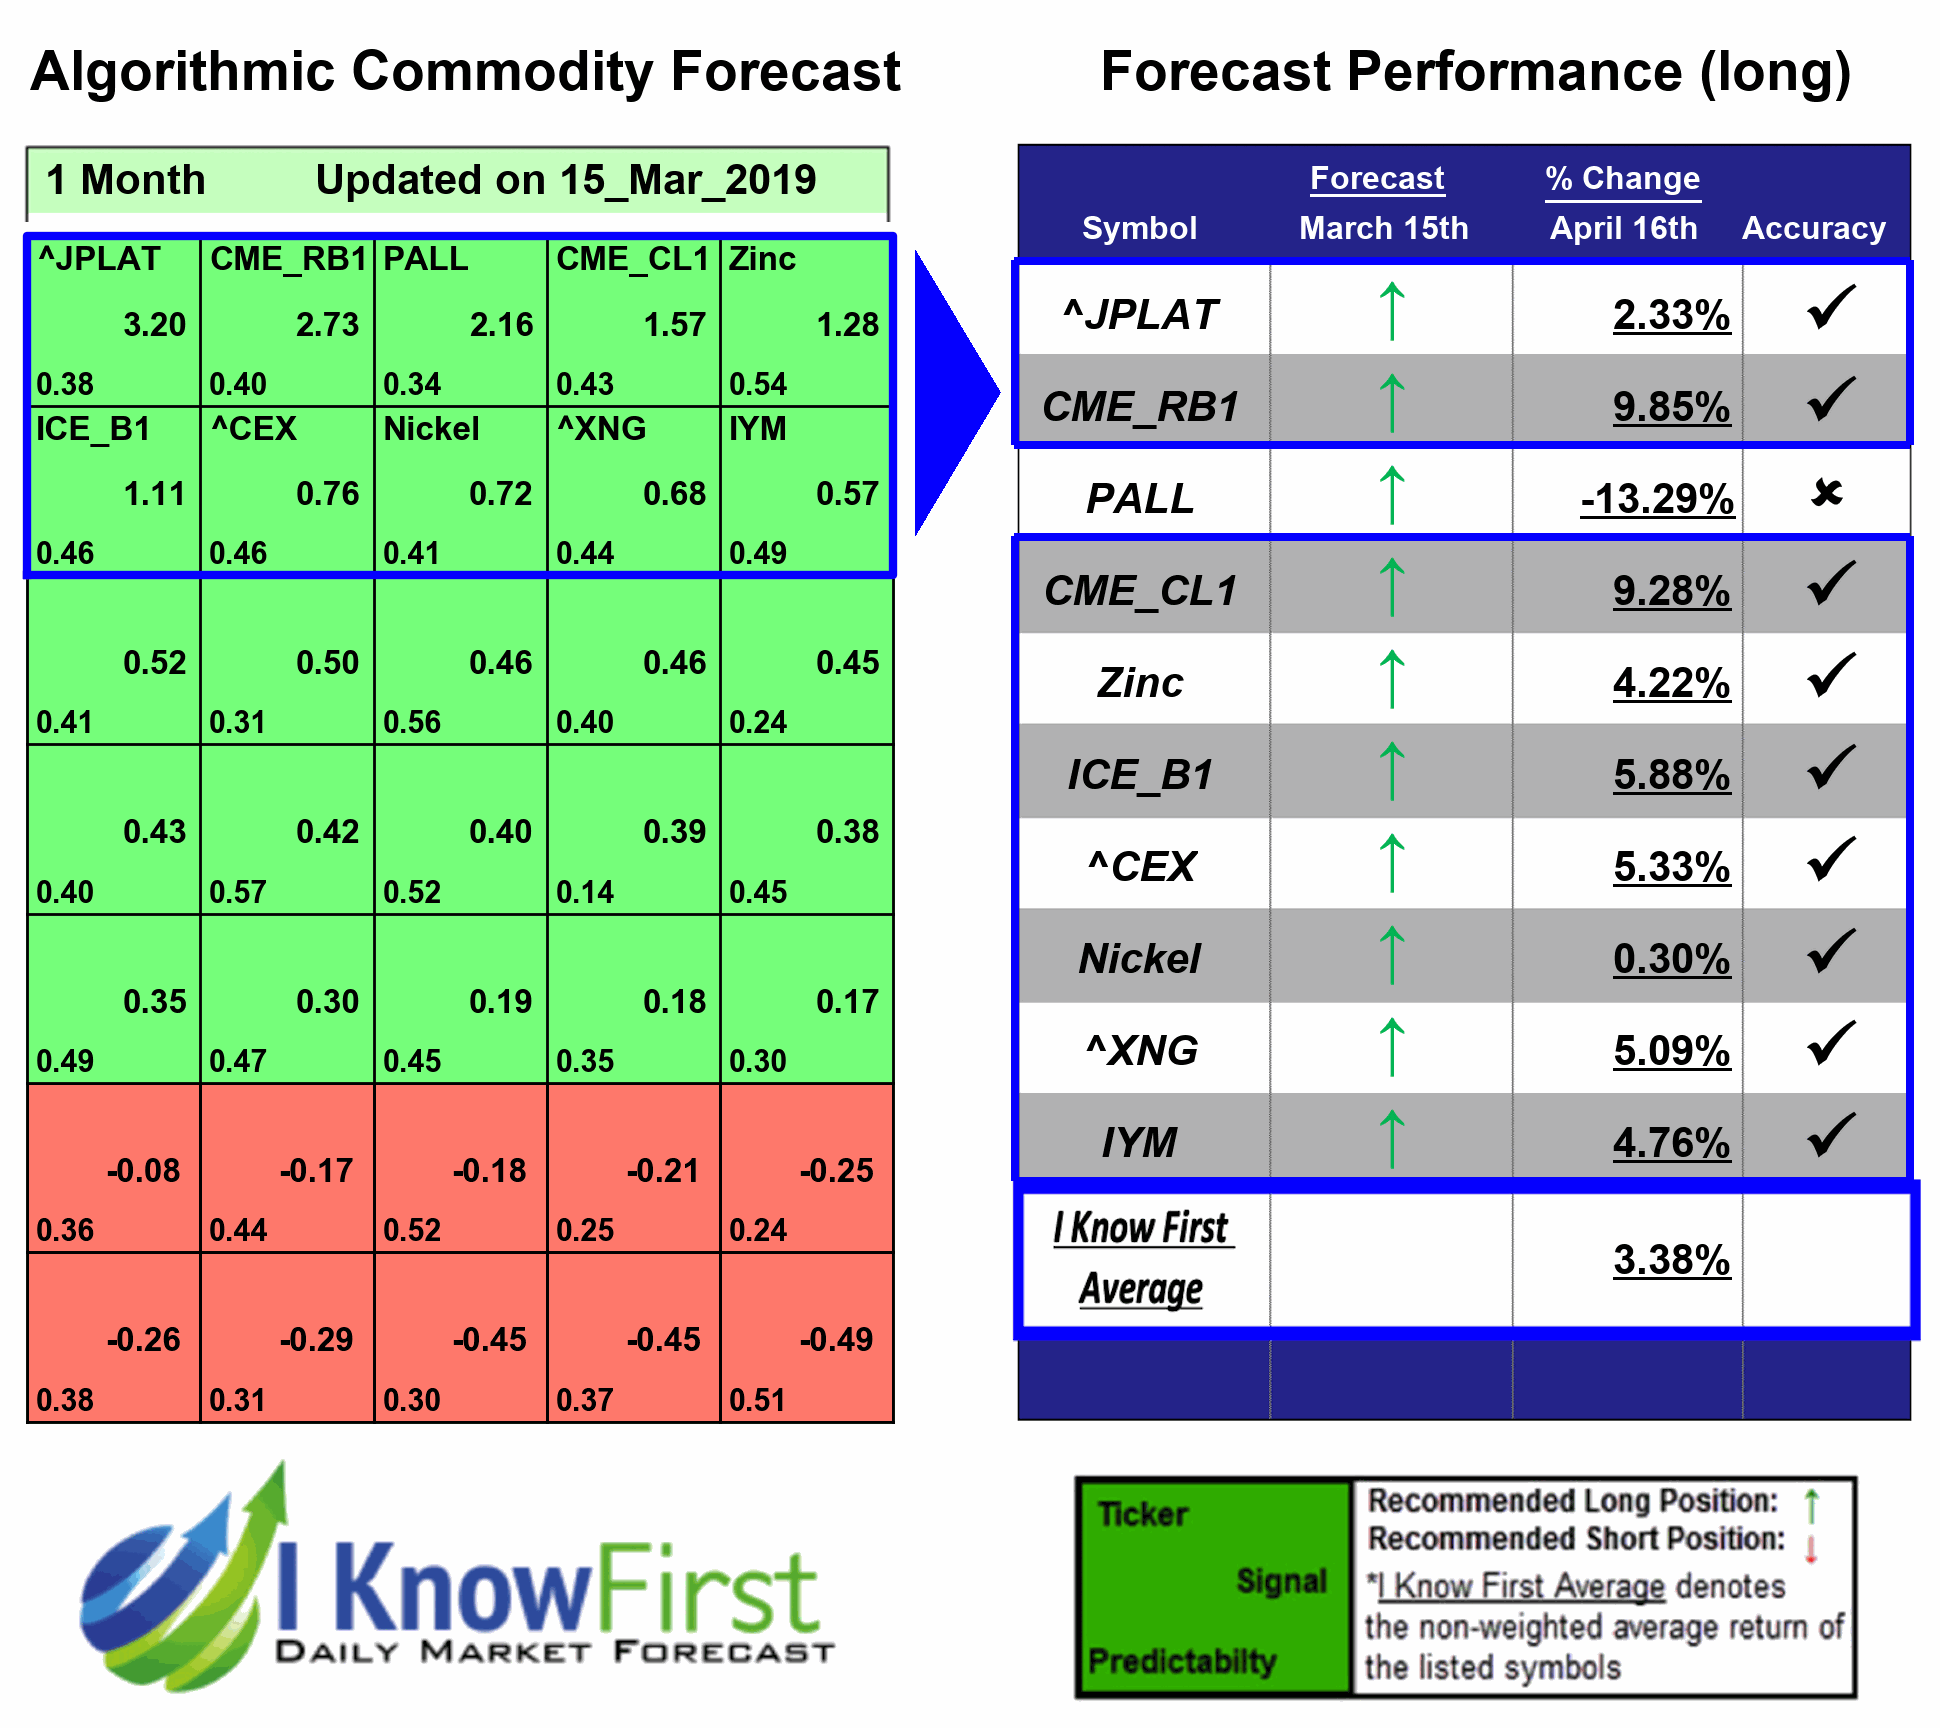 Commodities Outlook